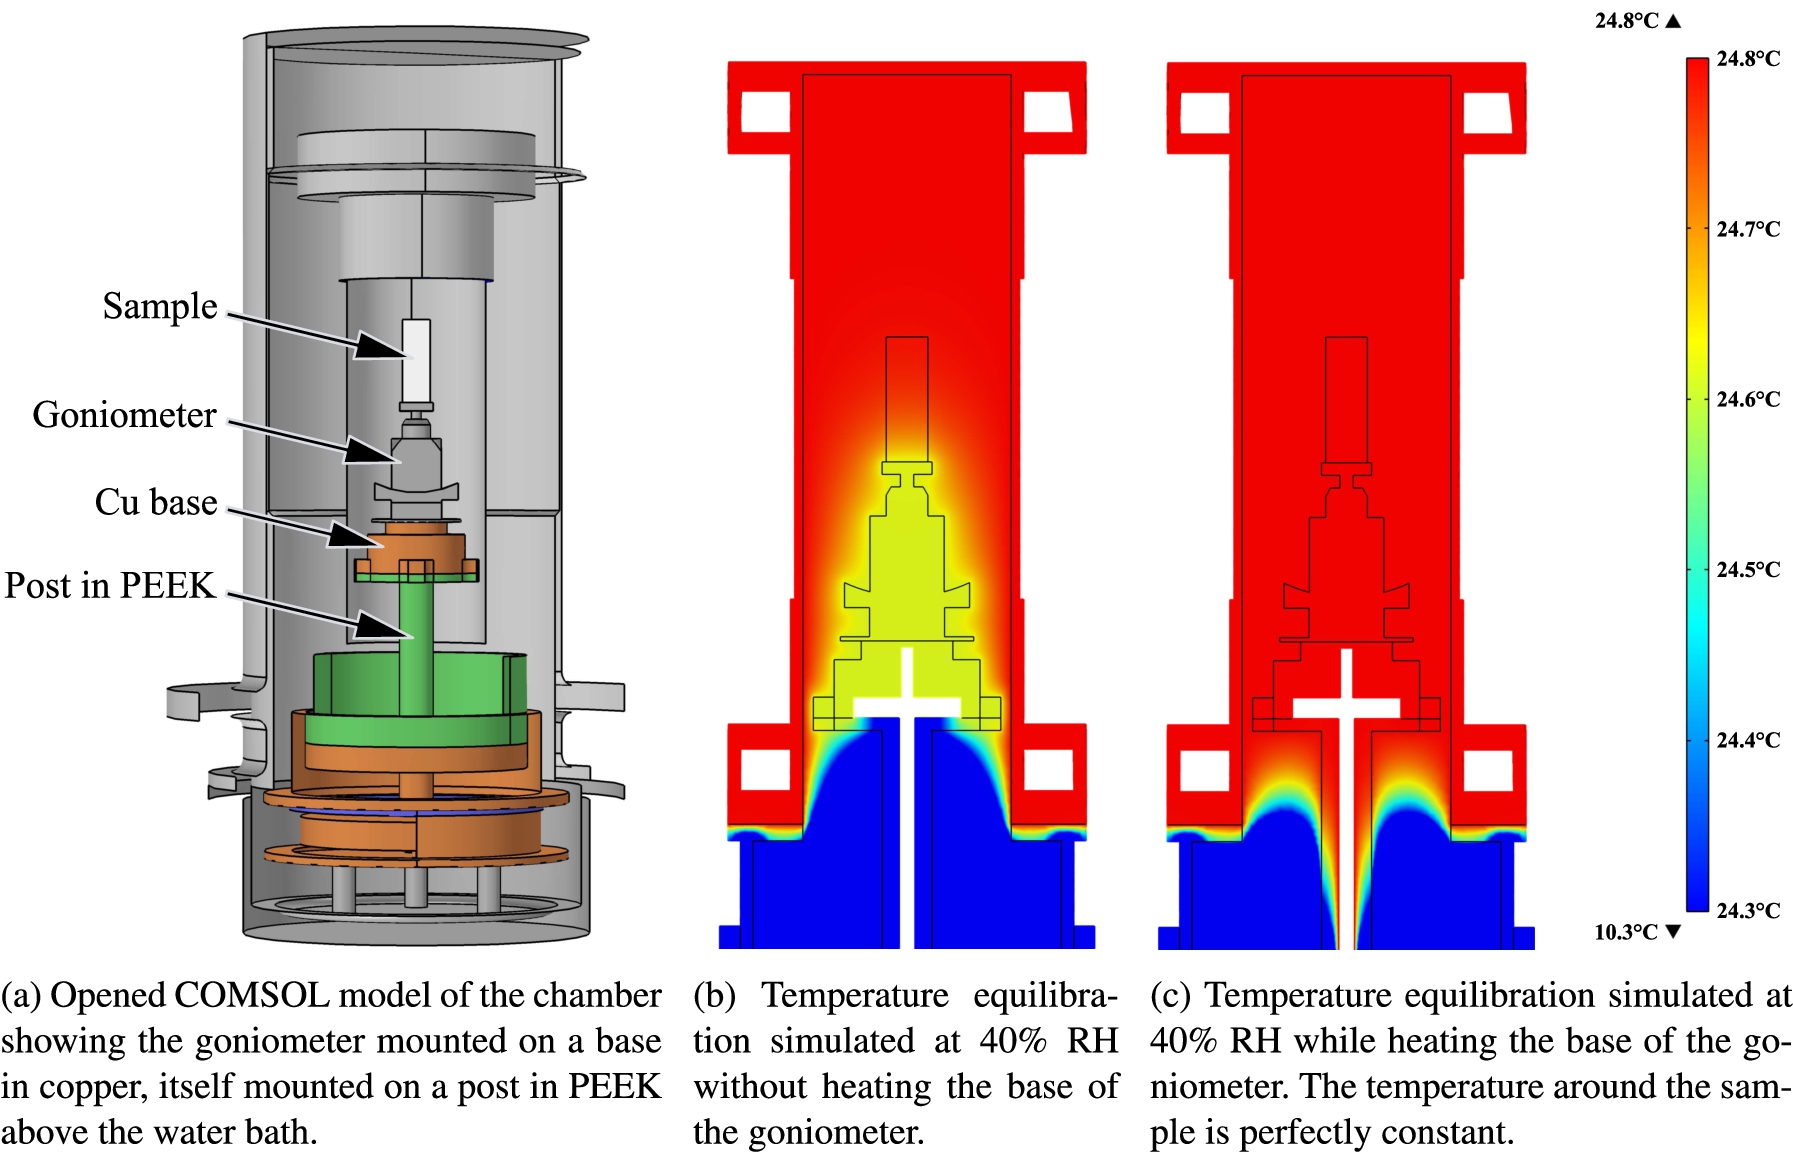 Finite element simulations of the design at room temperature and 40% RH. The gradient of temperature on the sample volume is cancelled when the base of the goniometer is heated.